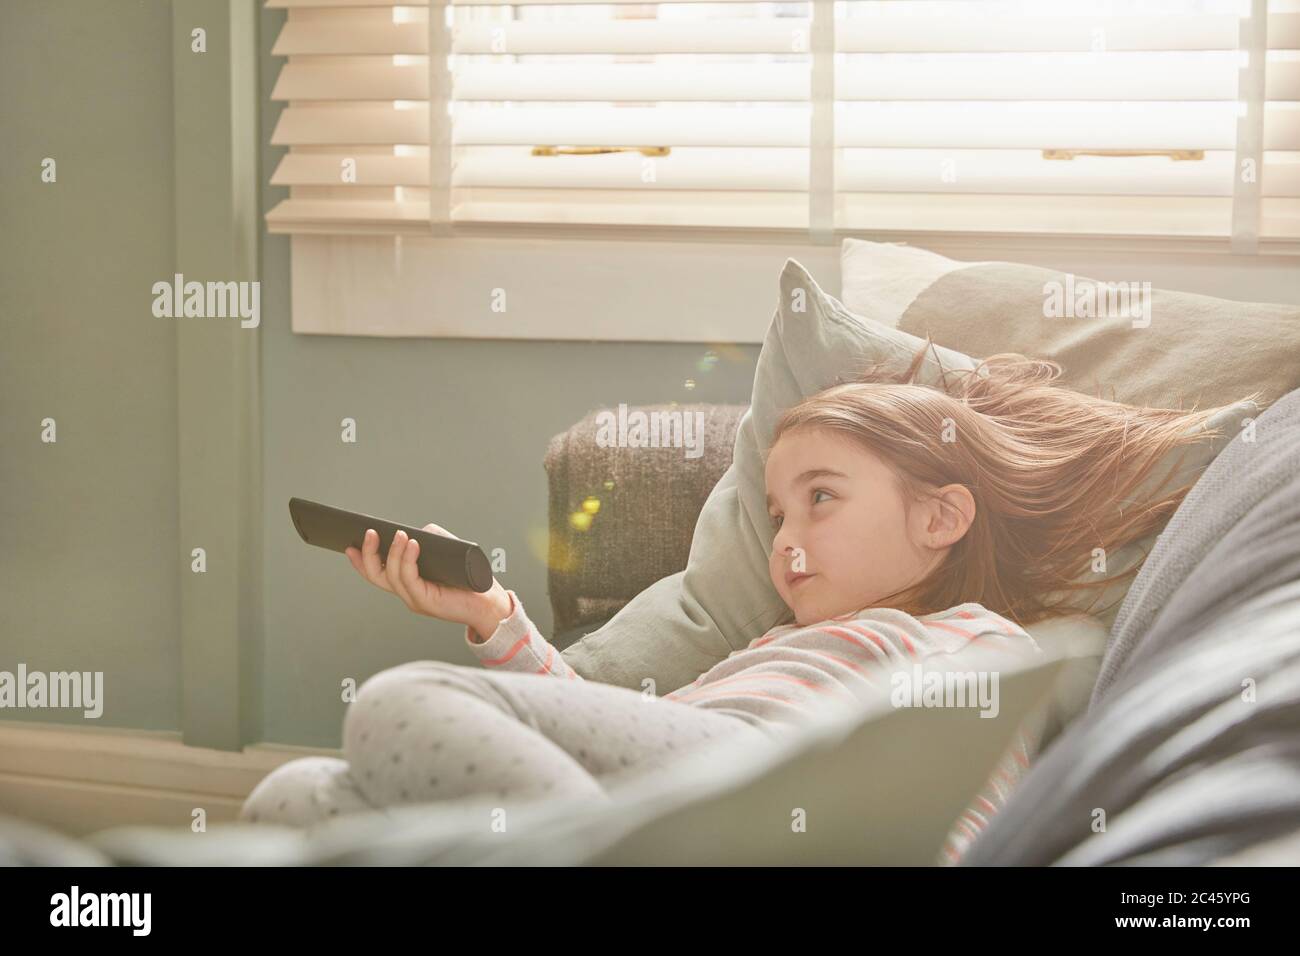 Girl lying on a sofa in her pajamas, watching television. Stock Photo